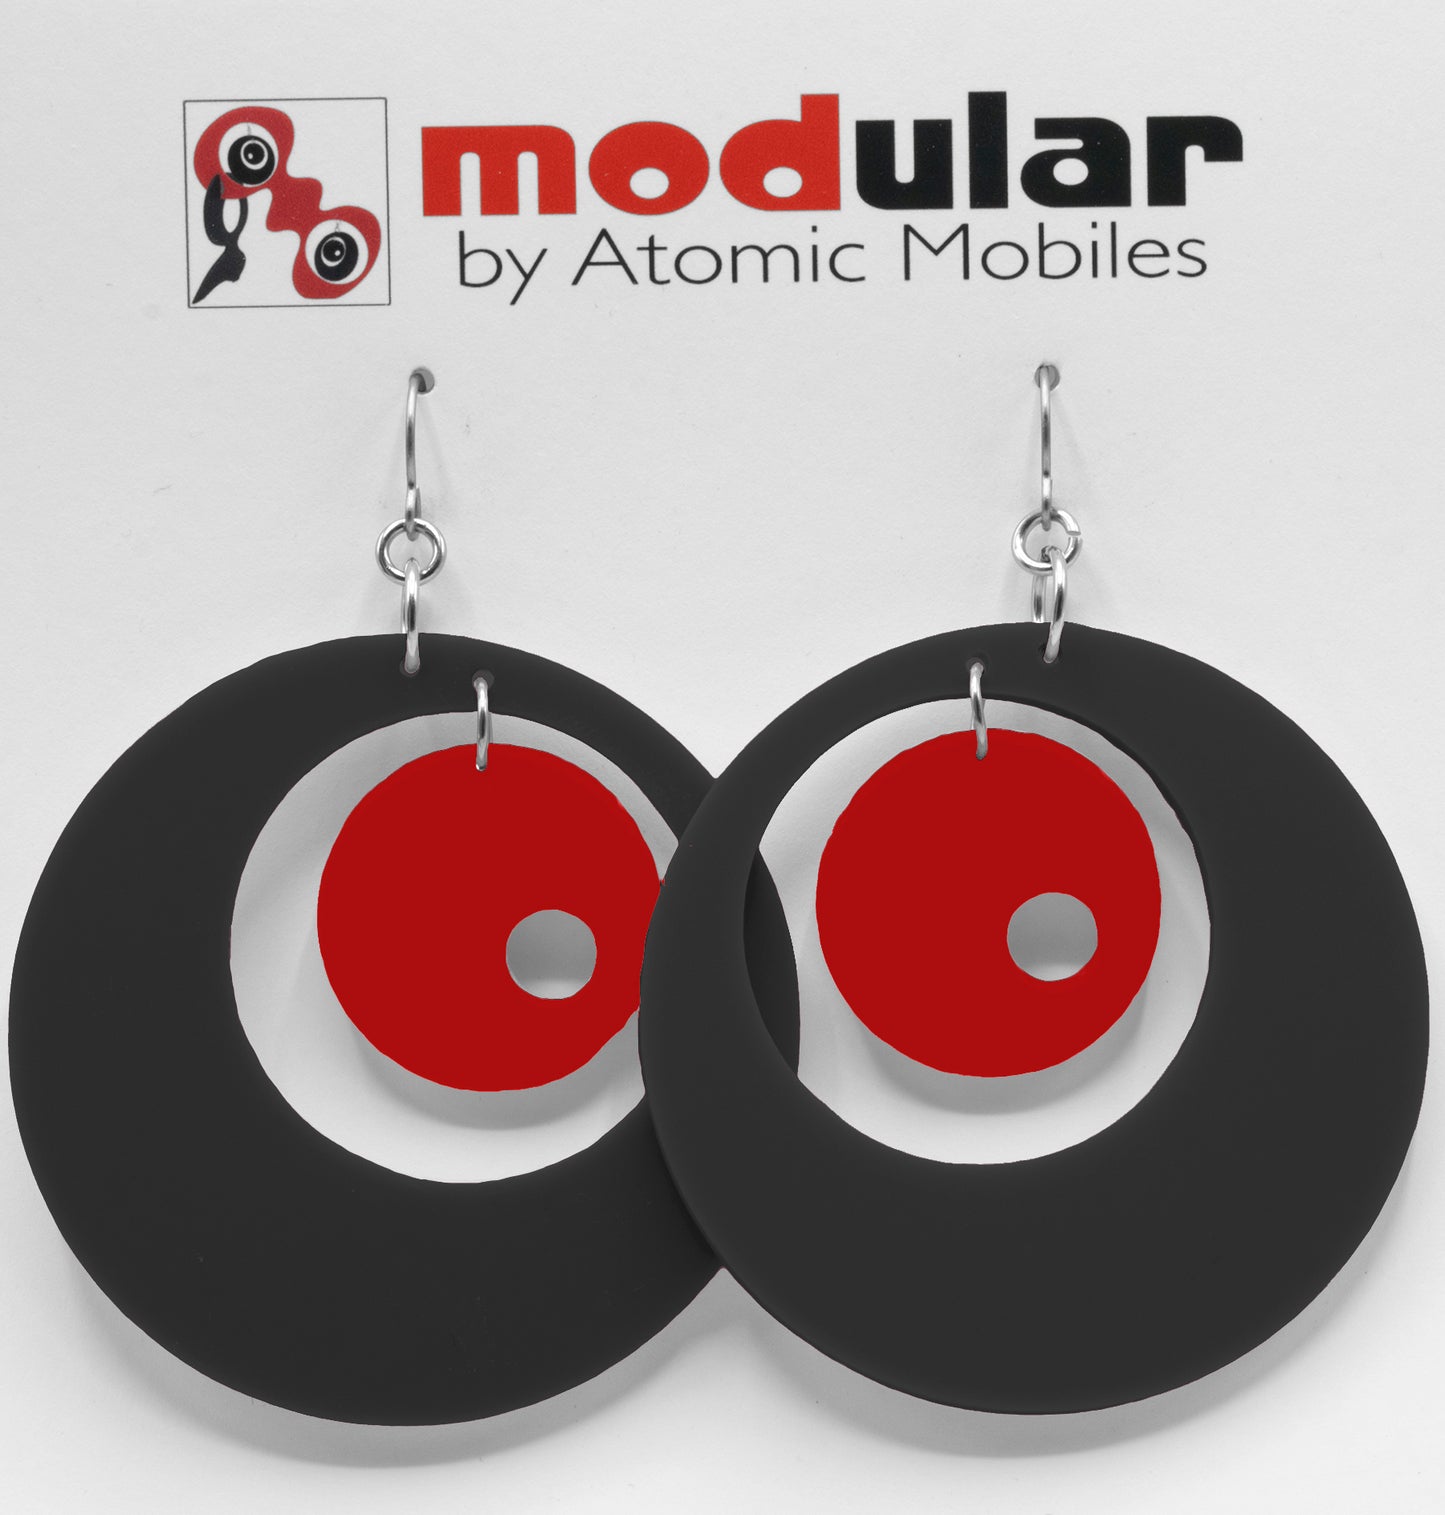 MODular Earrings - Groovy Statement Earrings in Black and Red by AtomicMobiles.com - retro era inspired mod handmade jewelry